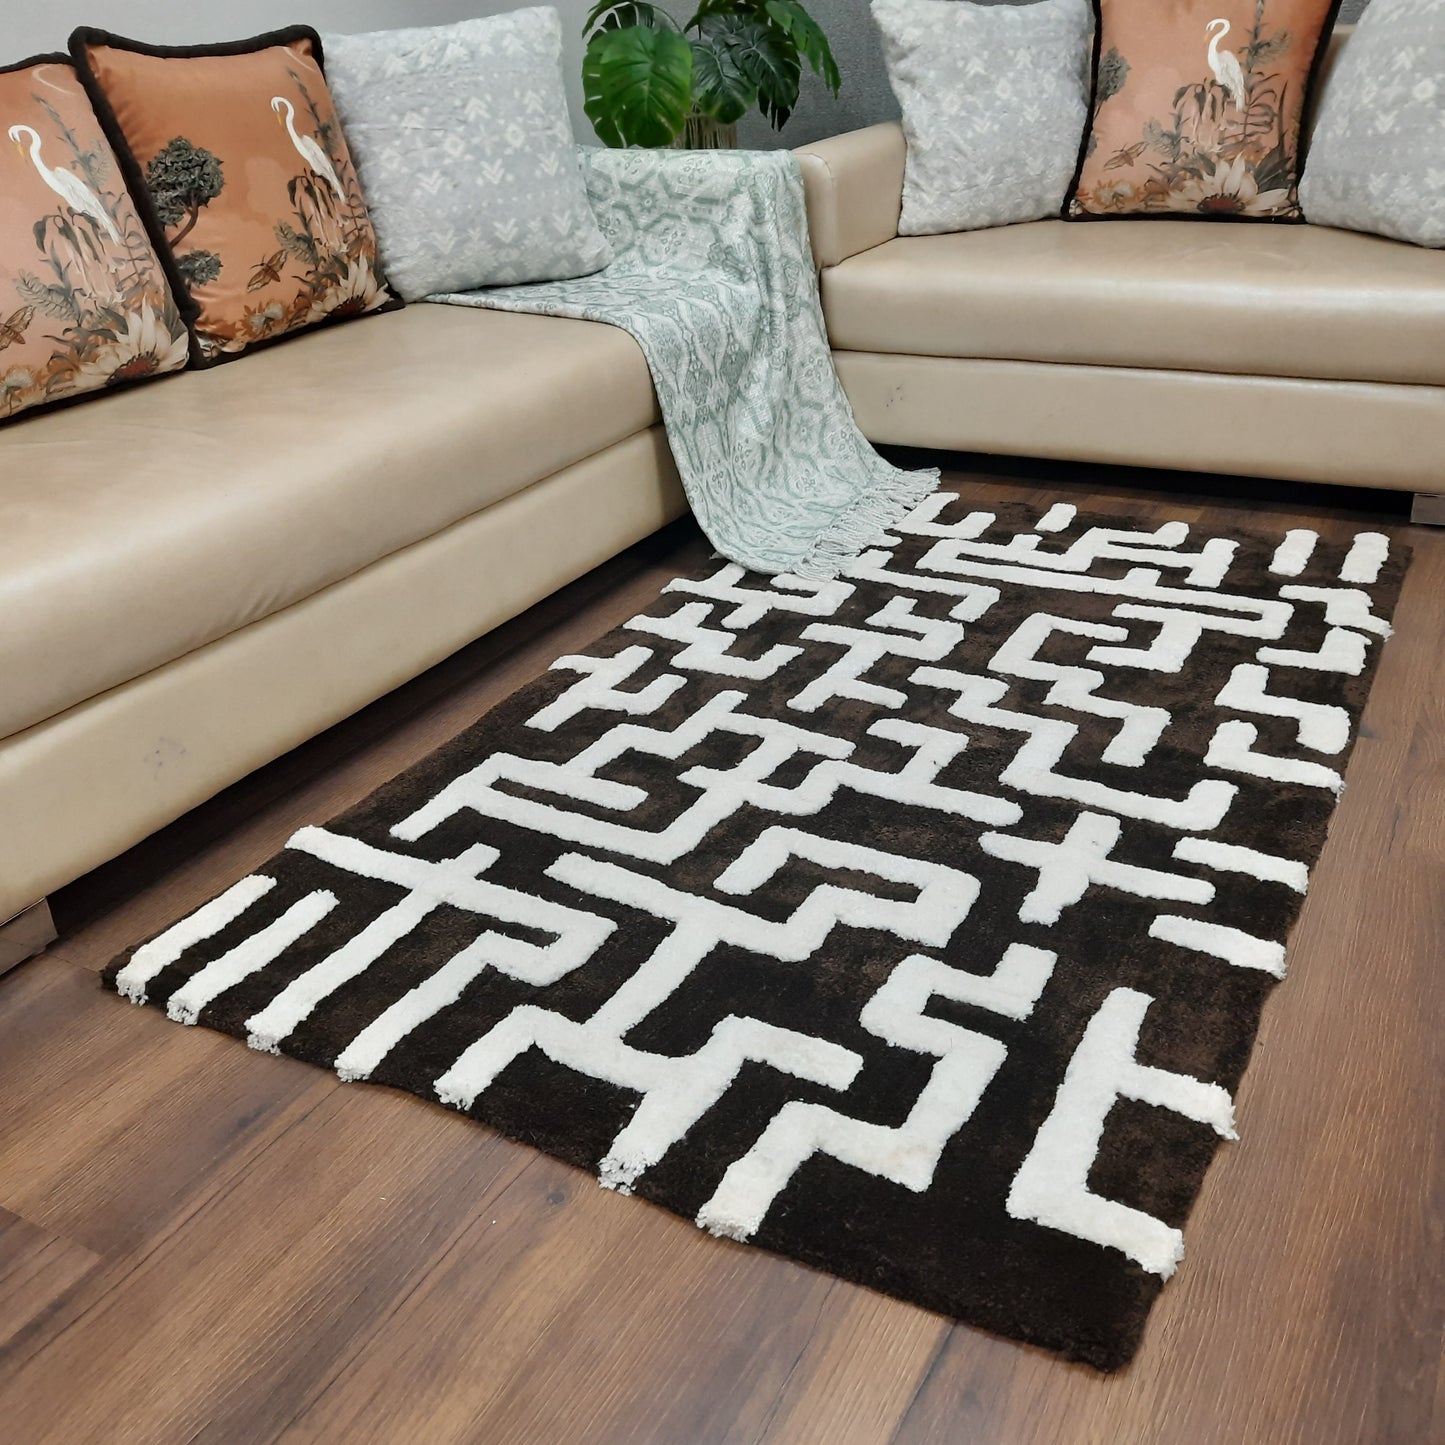 Avioni Modern Collection- Micro Dark Coffee & Ivory With Geometric Design Tufted Carpet-Different Sizes Shaggy Fluffy Rugs and Carpet for Living Room